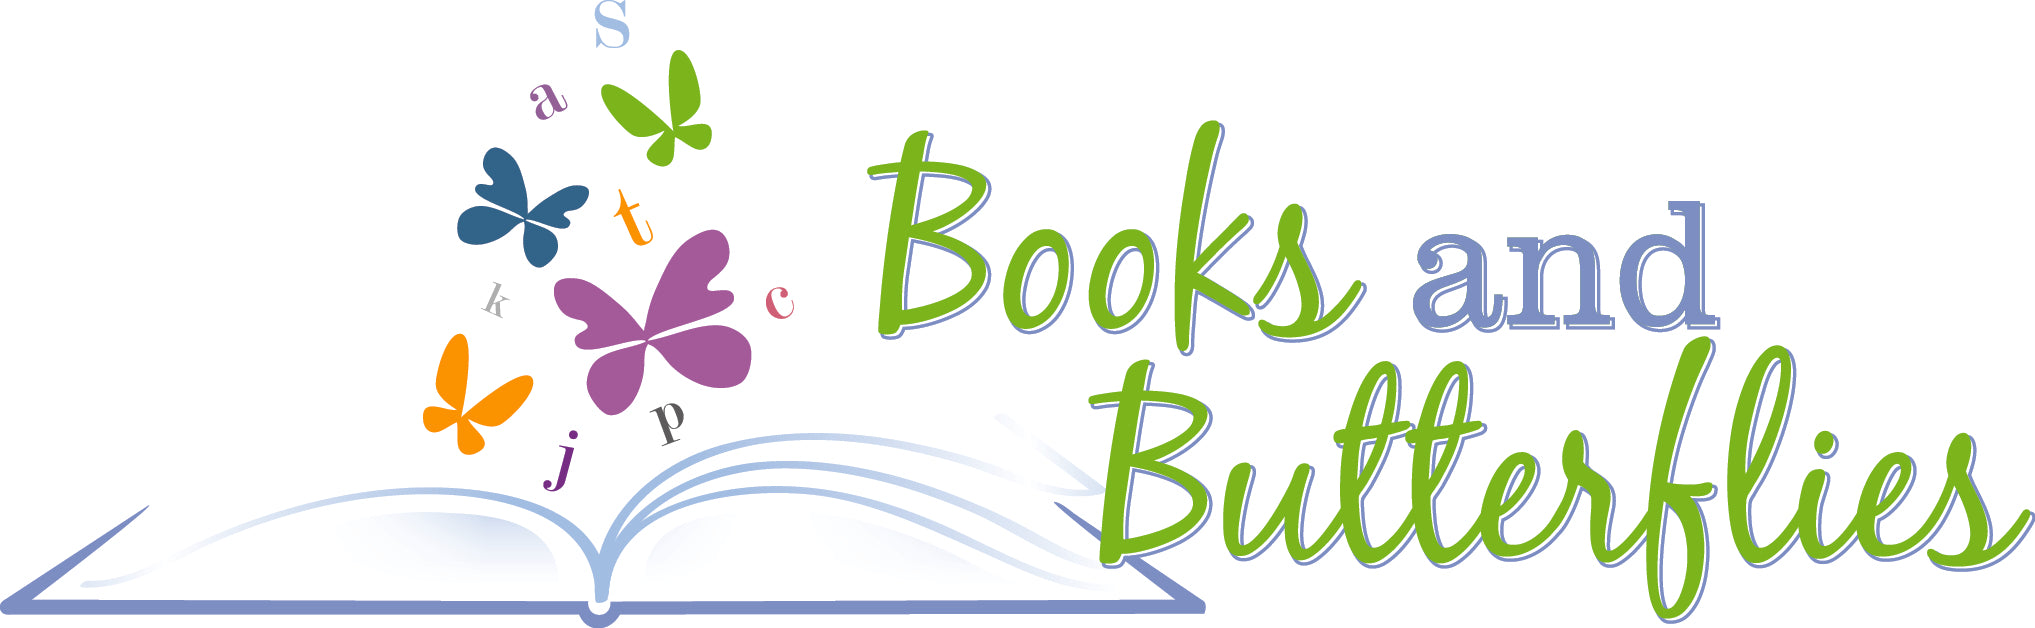 Goodnight St Louis Authors to Read at Books and Butterflies Event, Nov 6, 2018